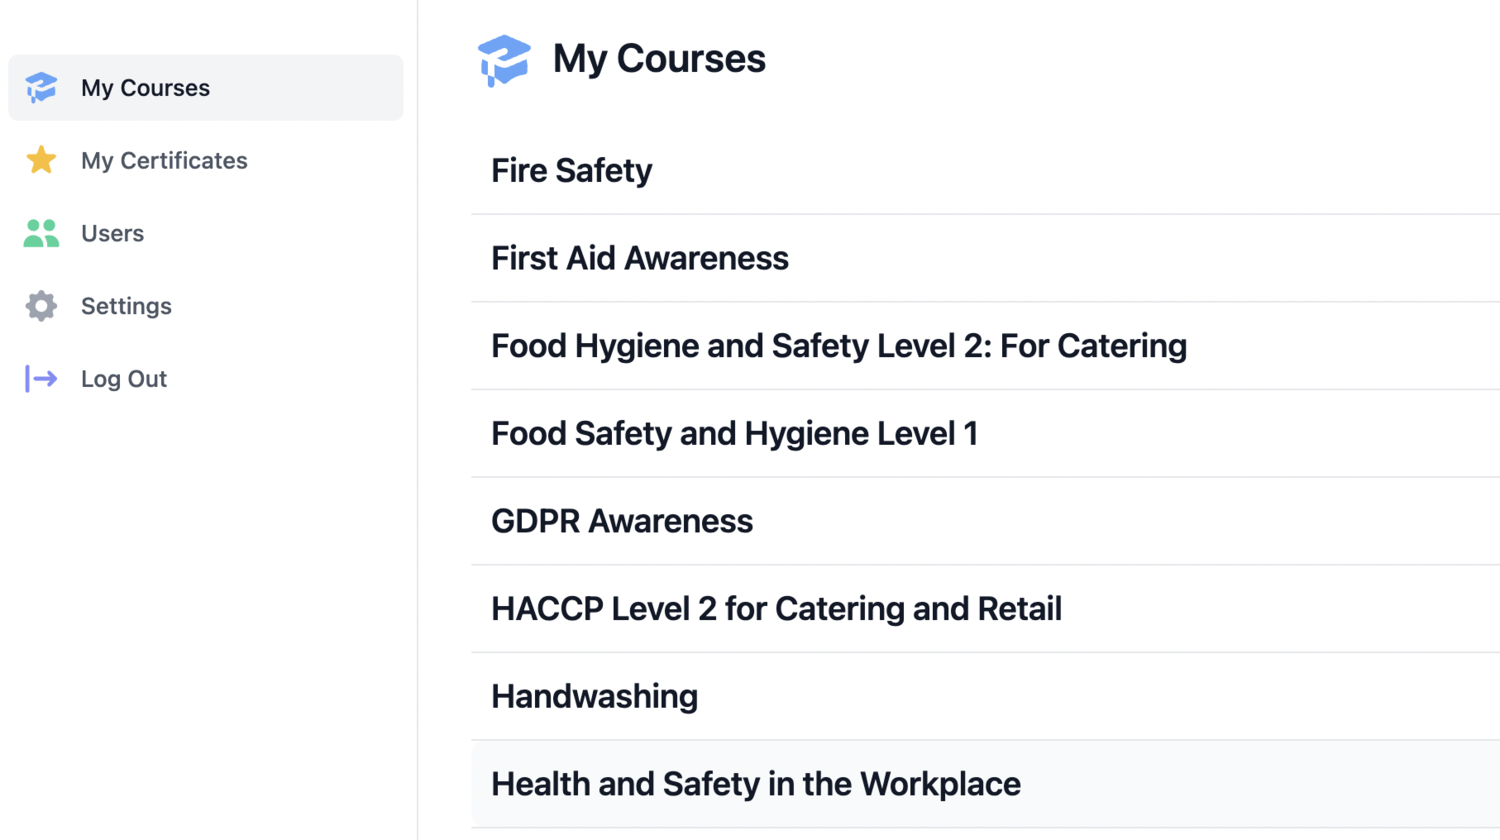 Completing courses